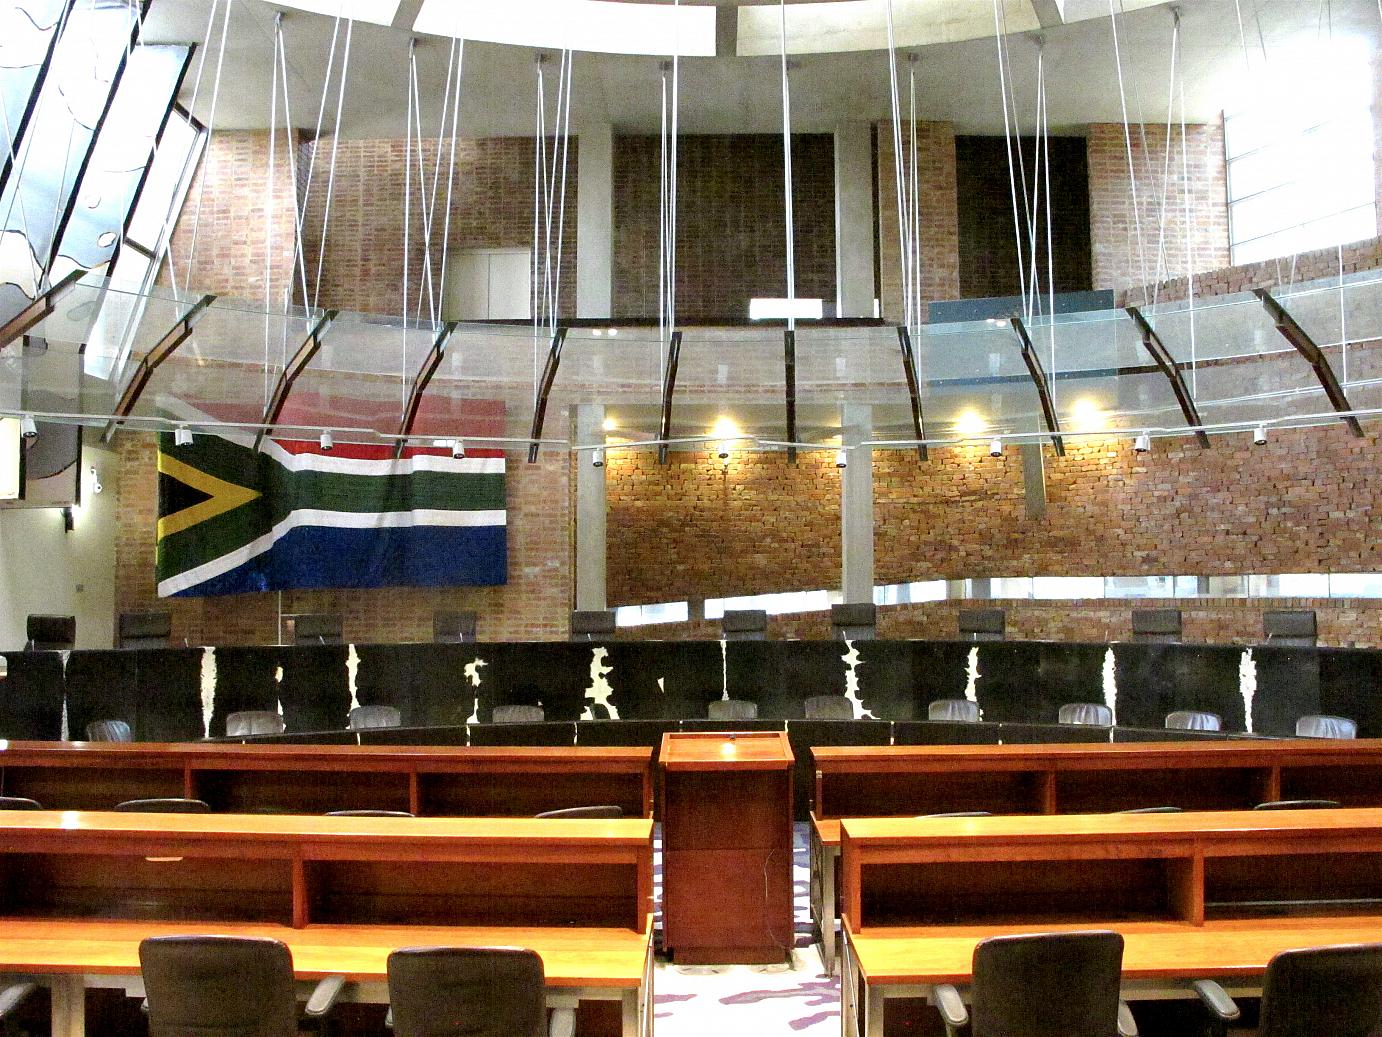 The Plenary Hall of the Constitutional Court in Johannesburg.